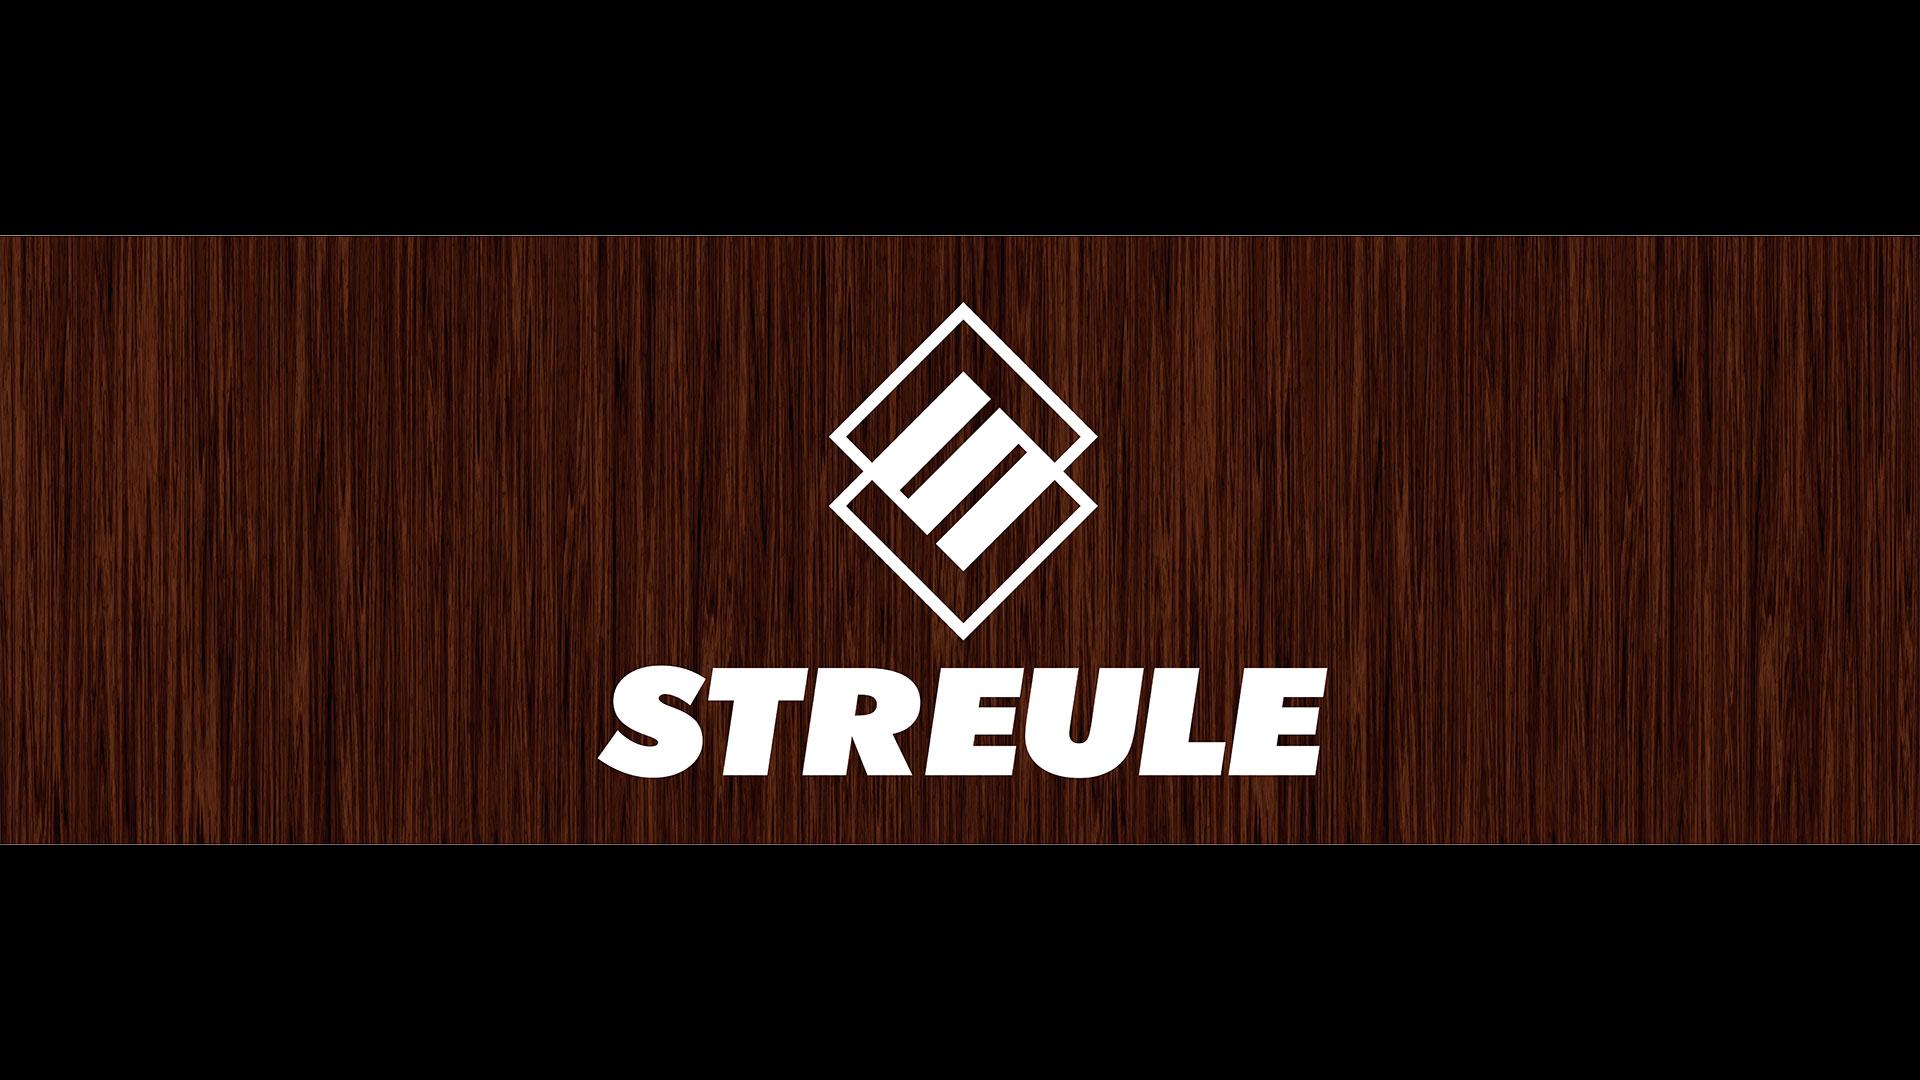 STREULE 2021-2022 SNOW WEAR COLLECTION